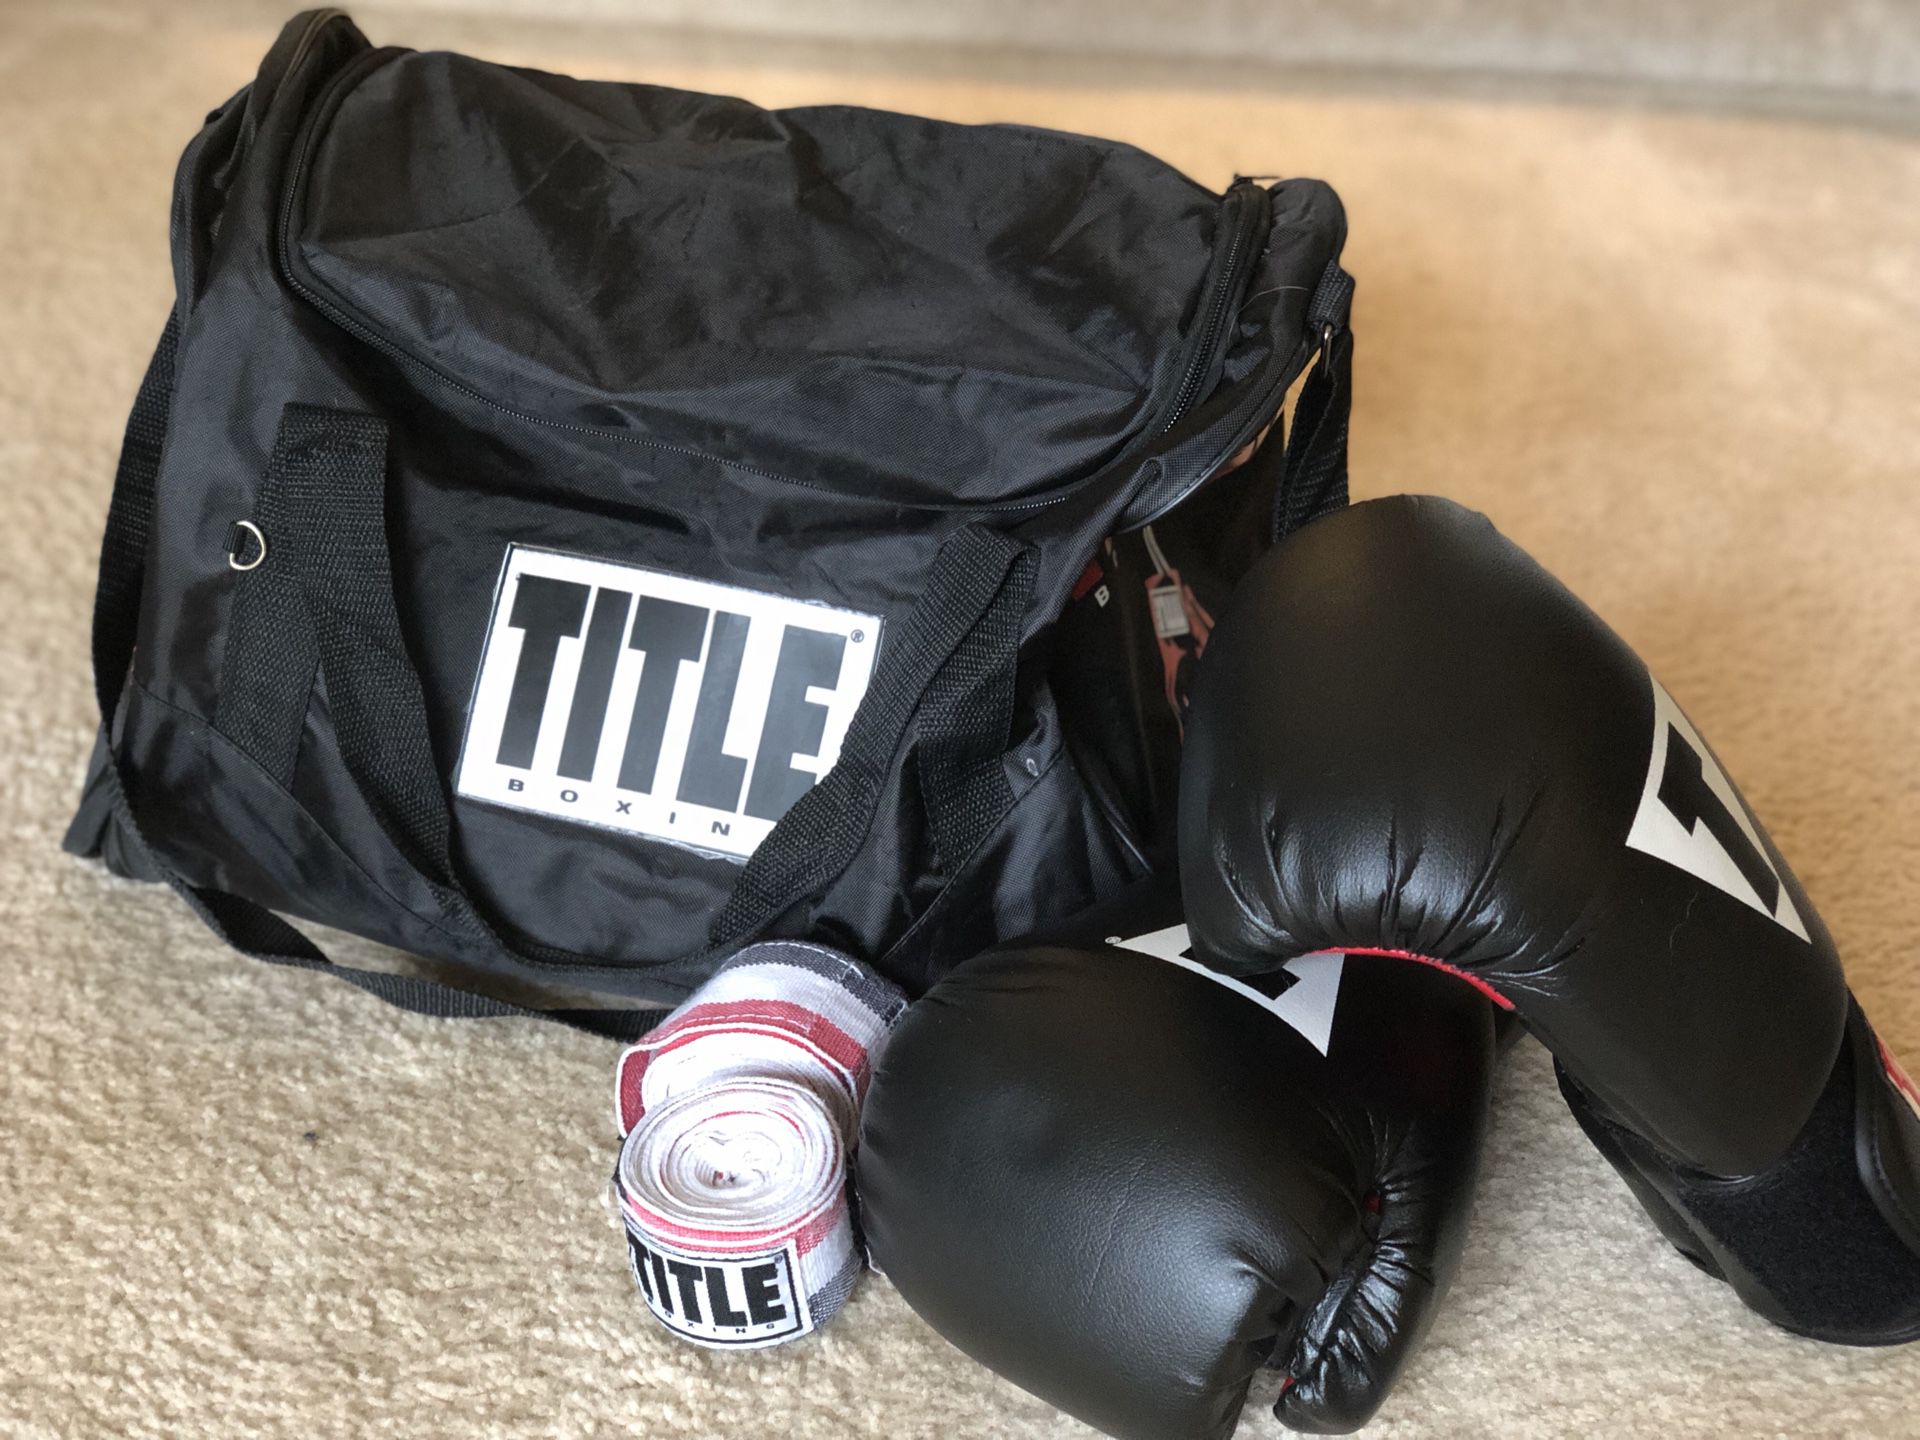 TITLE boxing bag, gloves, and straps